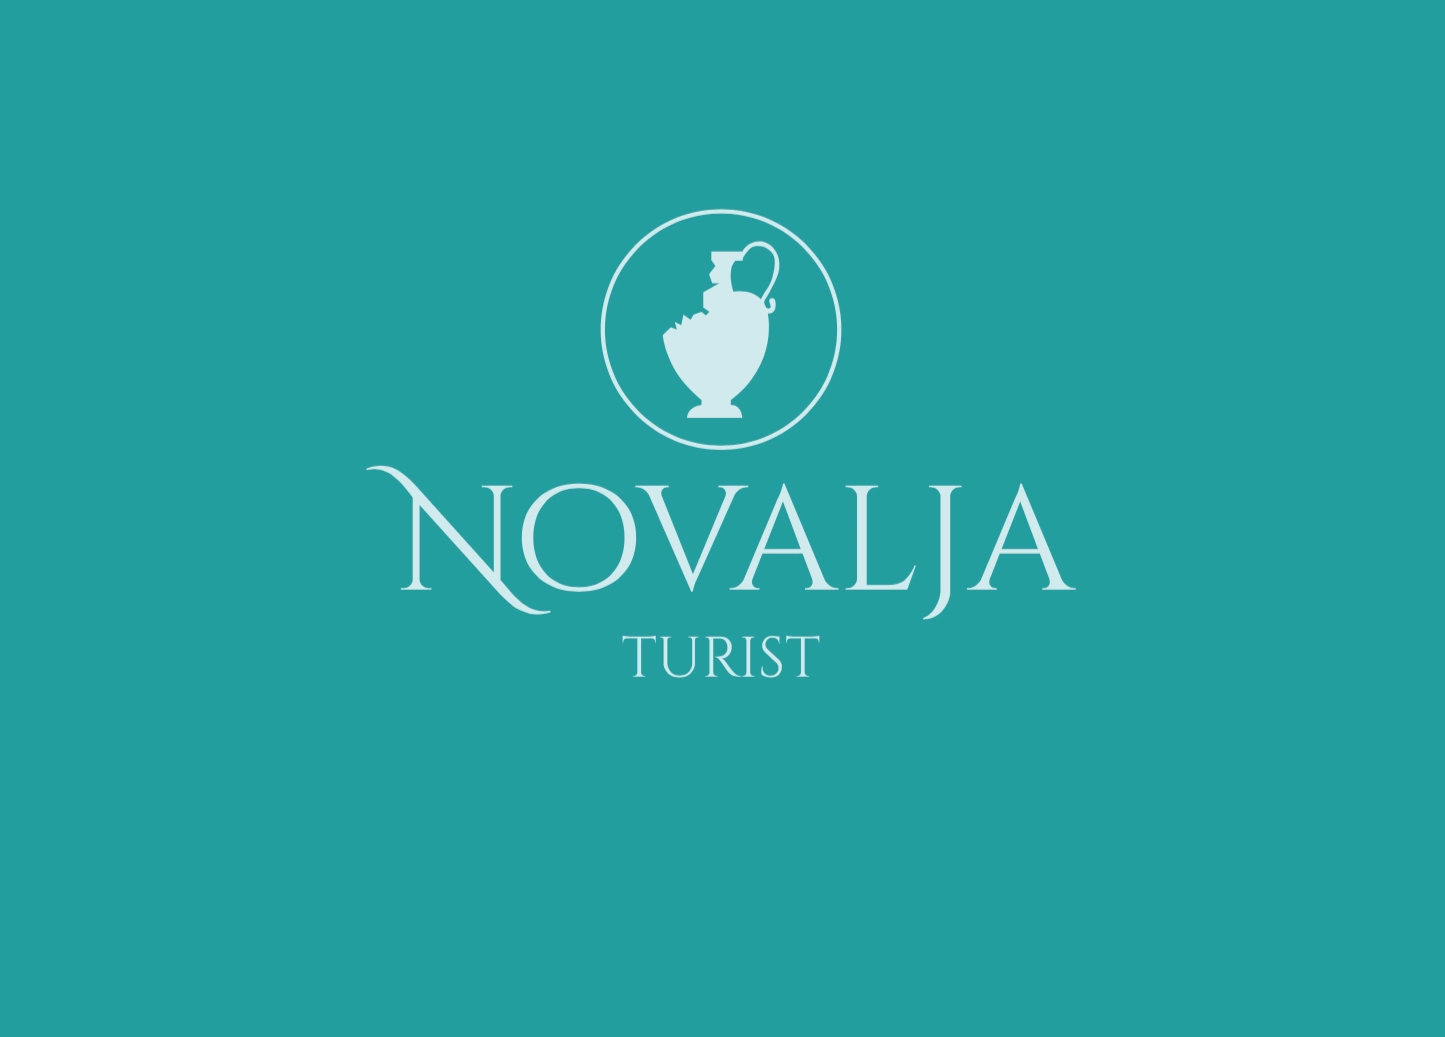 Website With A Booking System For Novalja Turist Agency